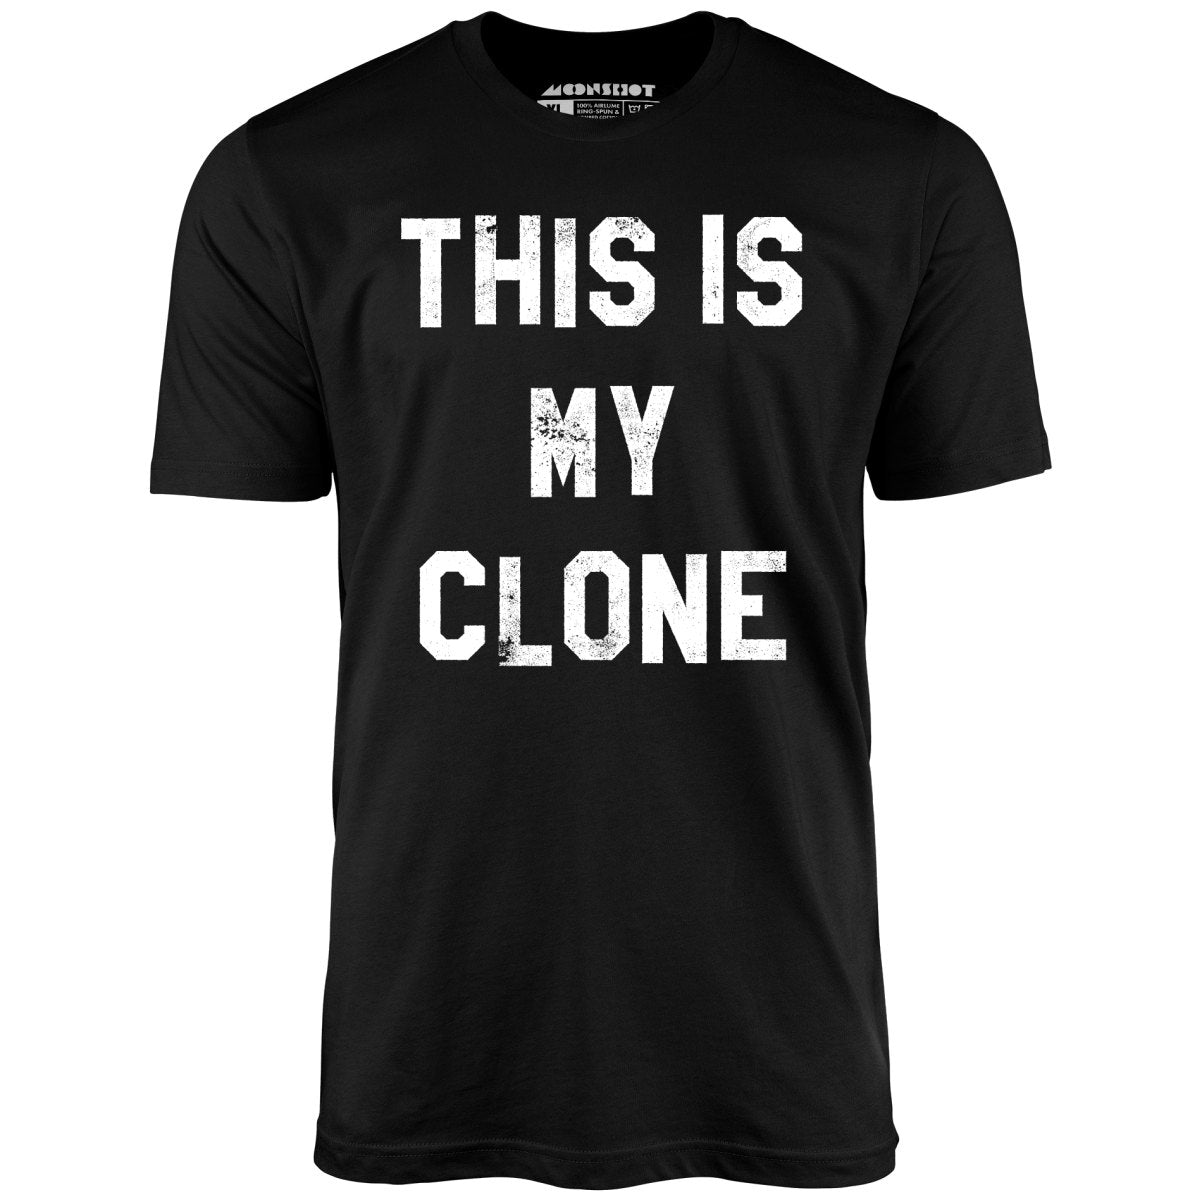 This is My Clone - Unisex T-Shirt